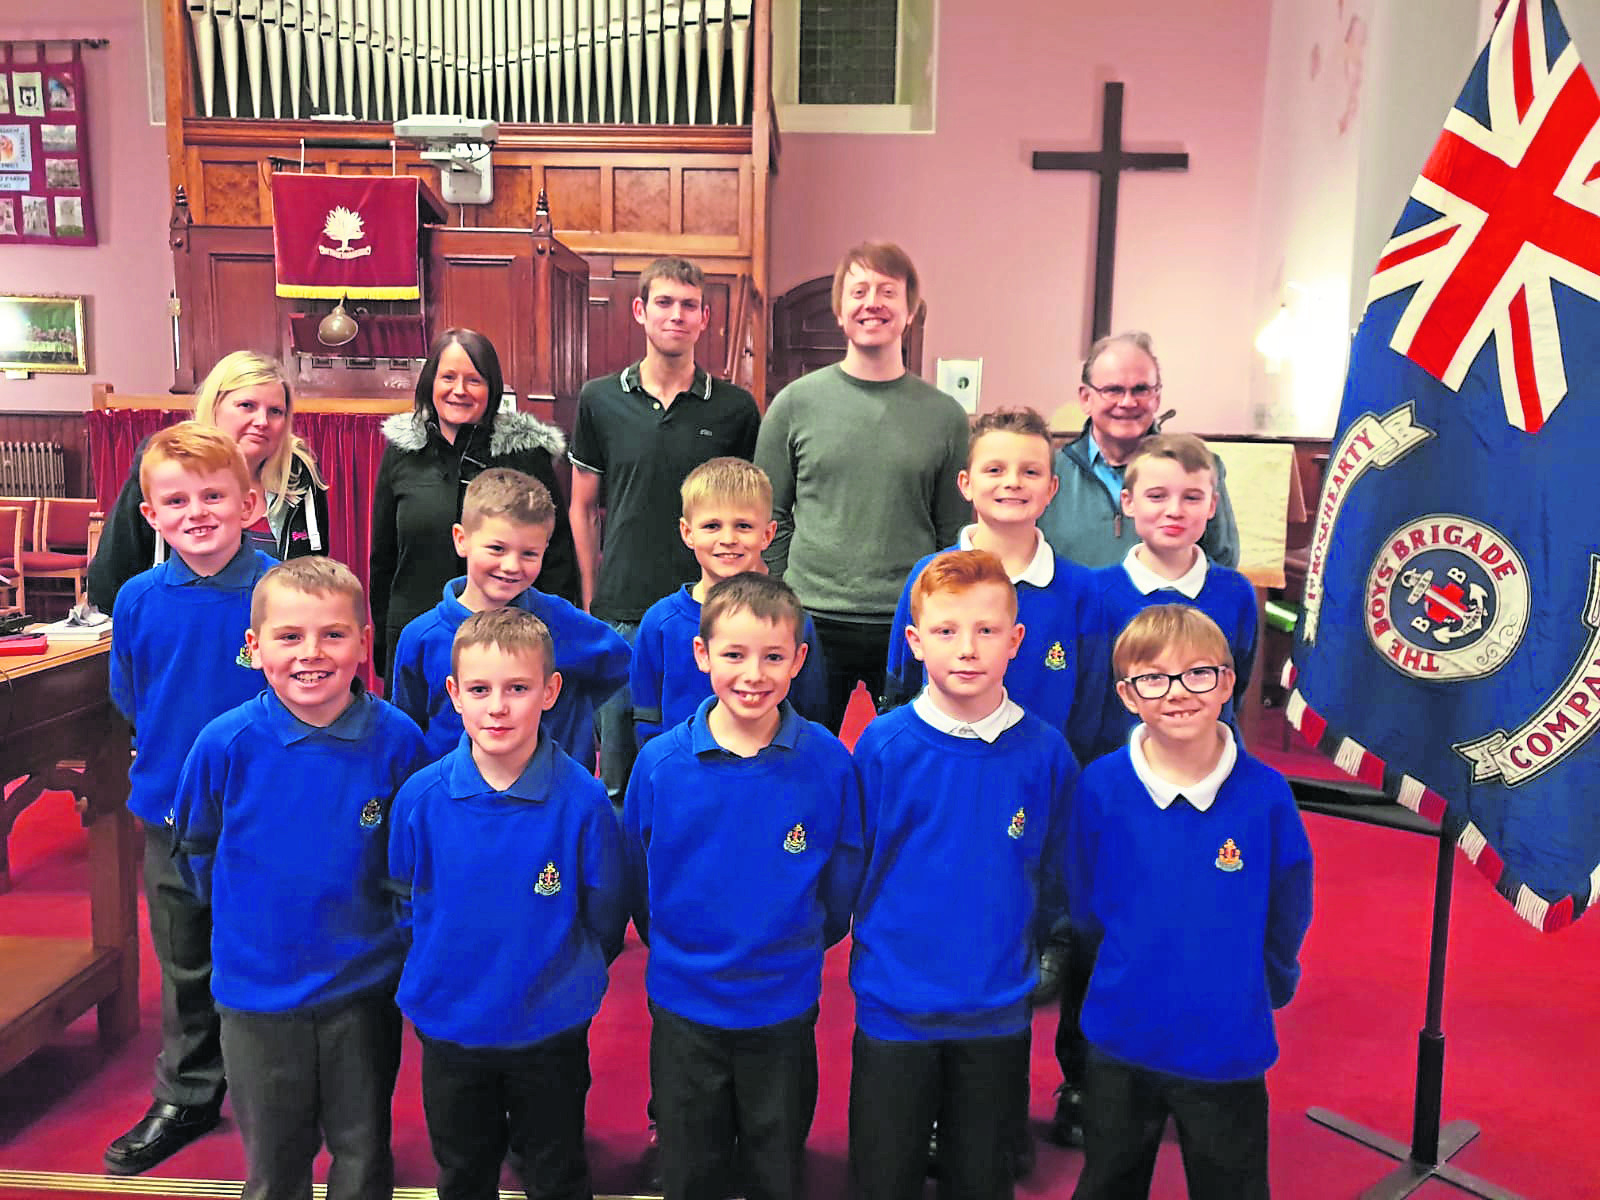 The 1st Rosehearty Boys Brigade started up again in September following support from various charities and community groups.